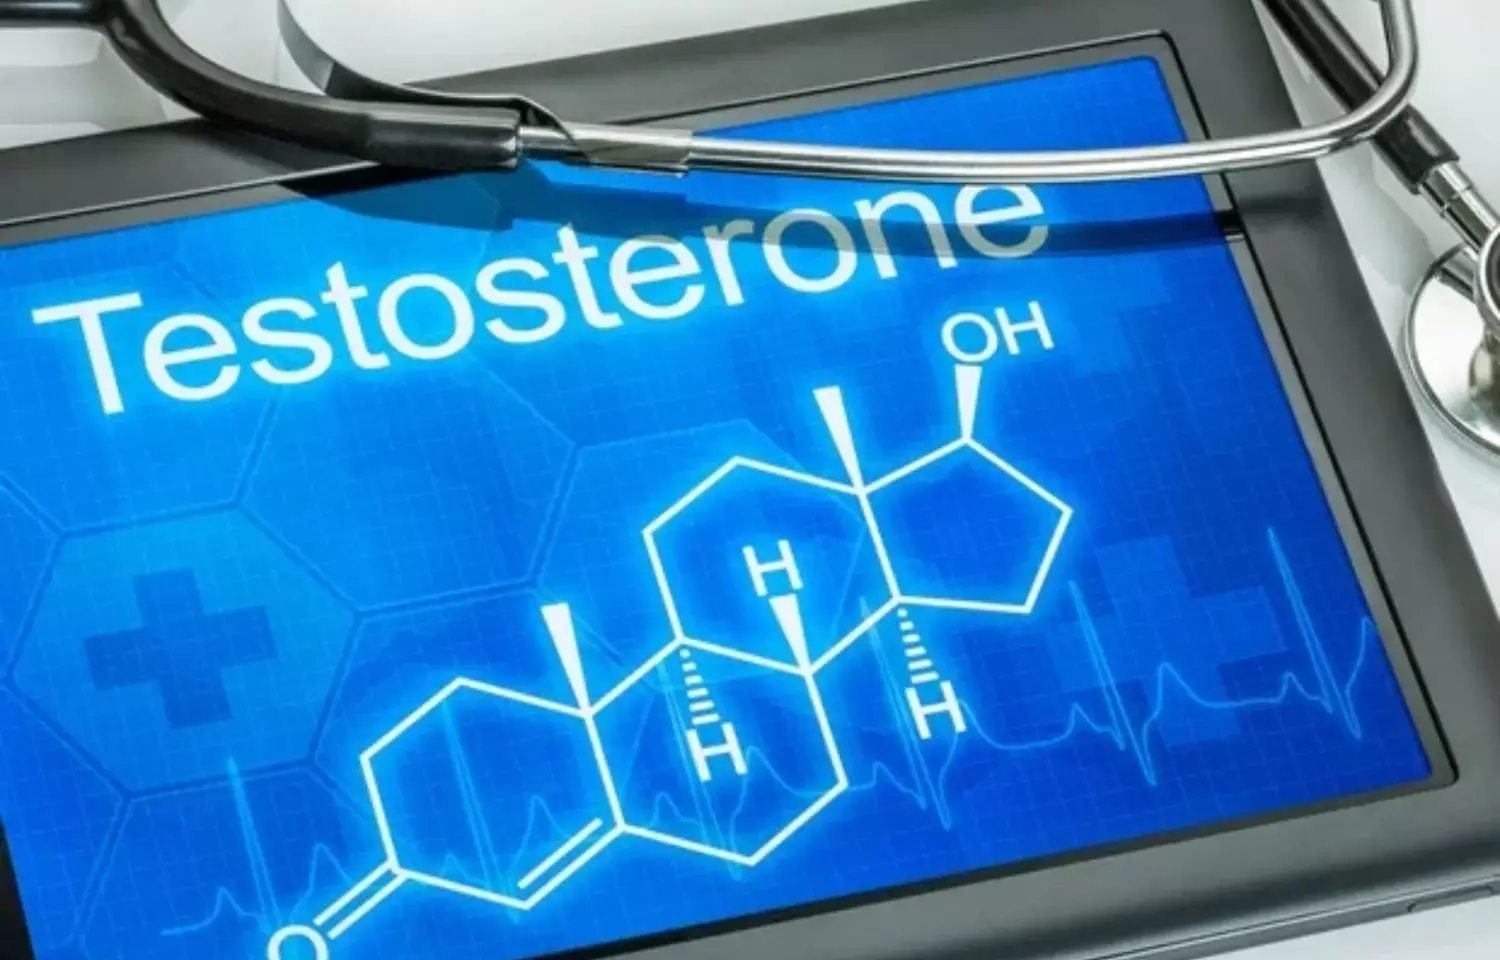 Low testosterone levels tied to increased COVID-19 hospitalization risk among men